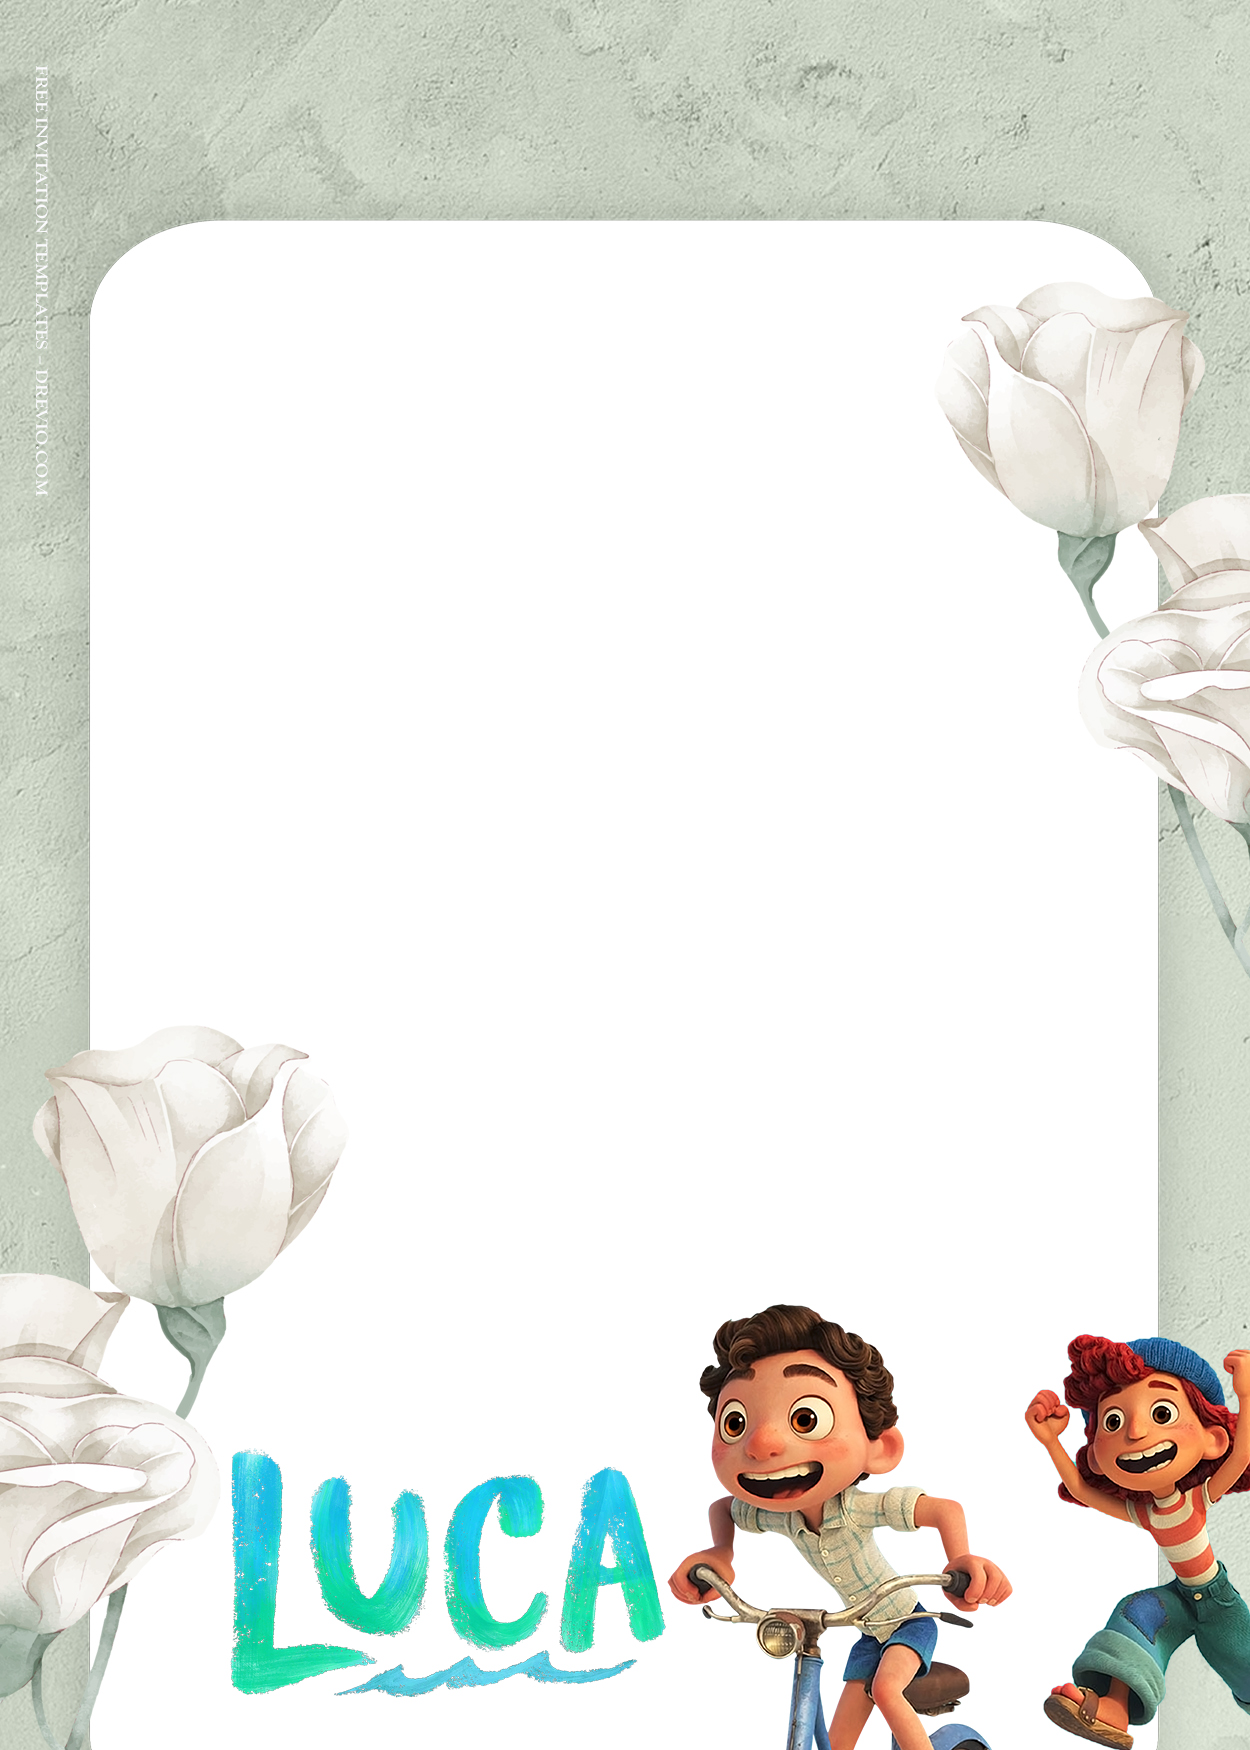 8+ Under Water Blossom With Luca Birthday Invitation Templates Two